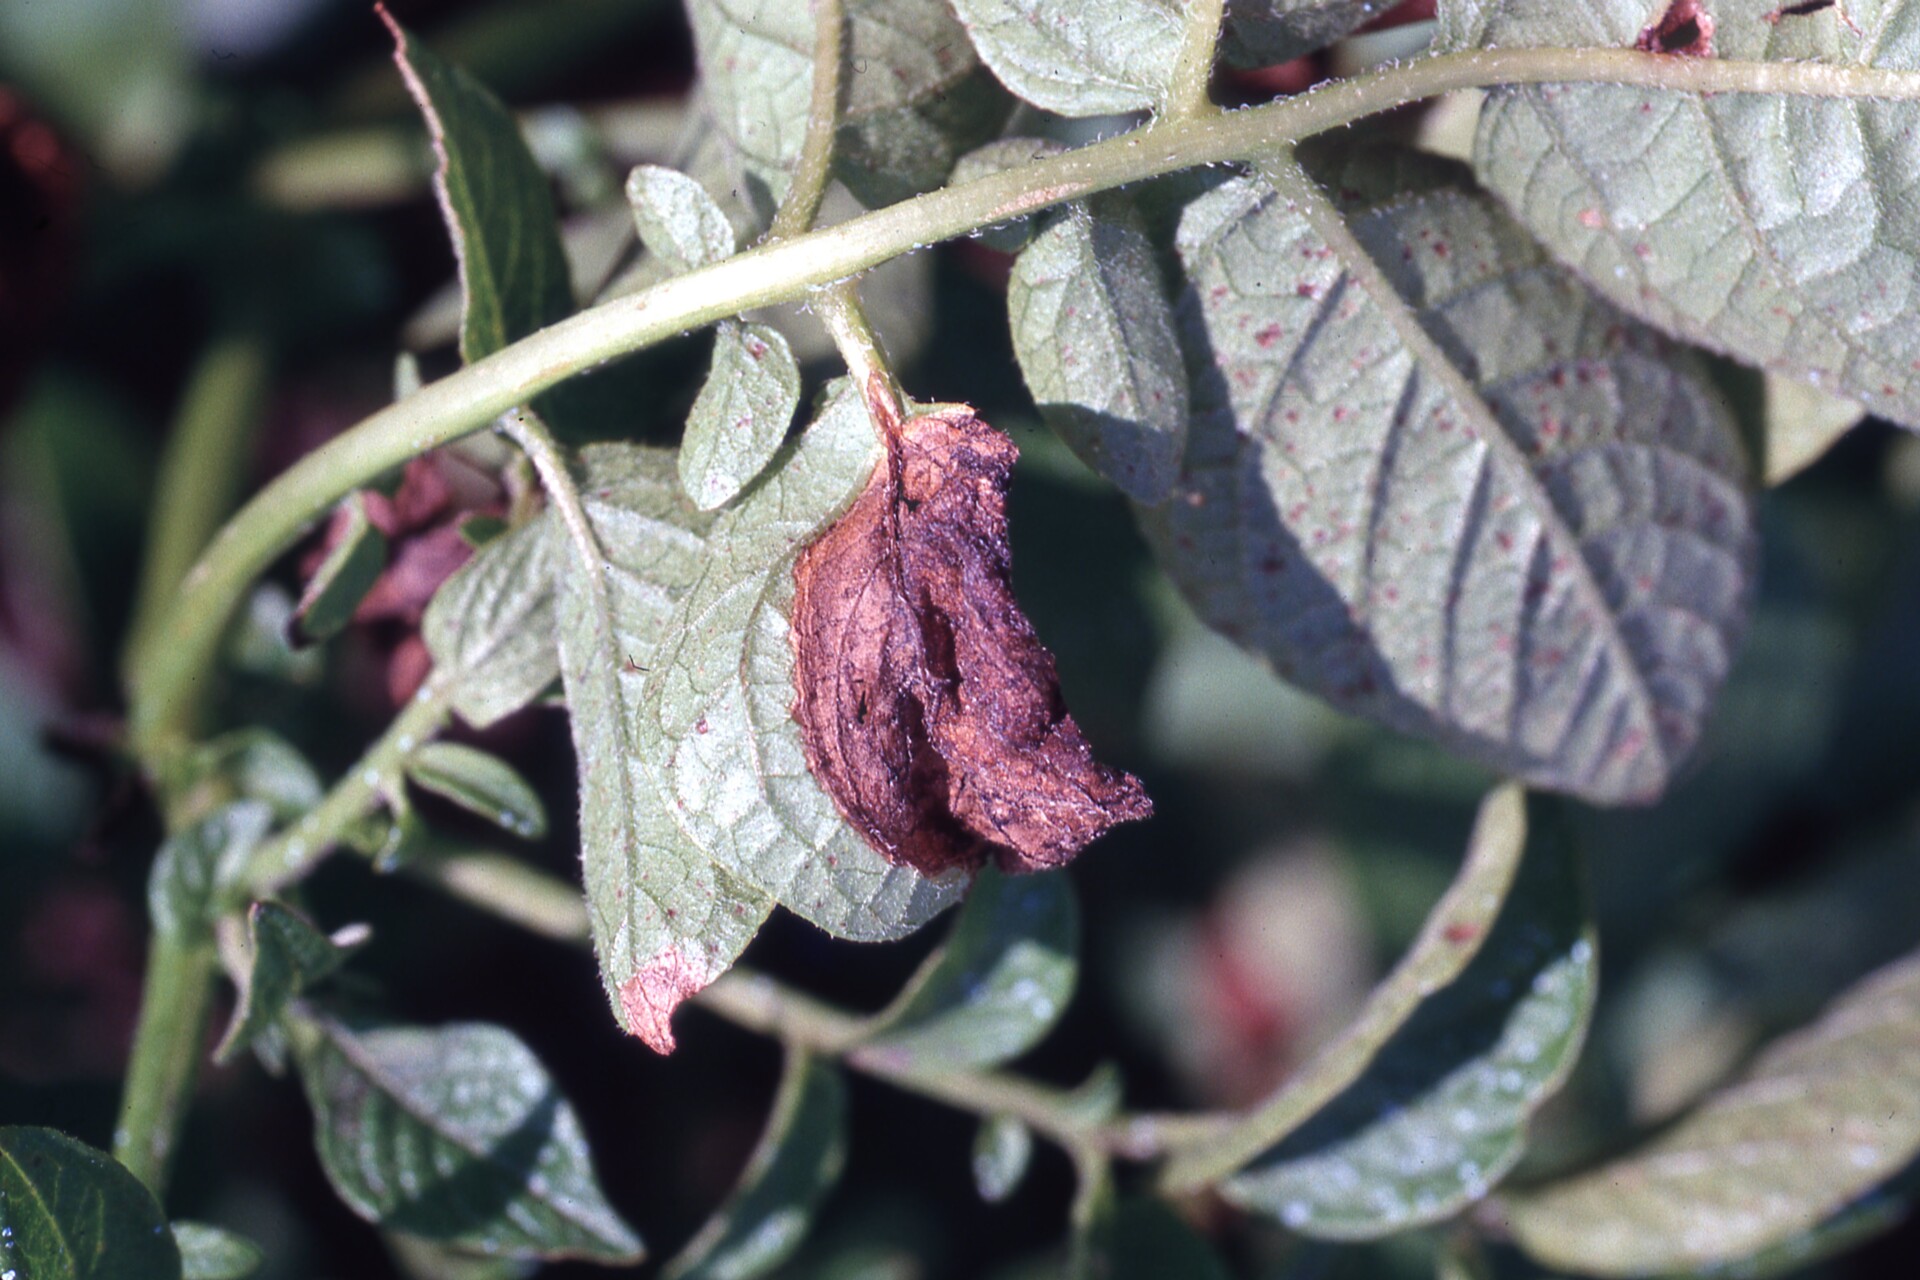 Figure 3. Lesion on leaf caused by late blight of potato.